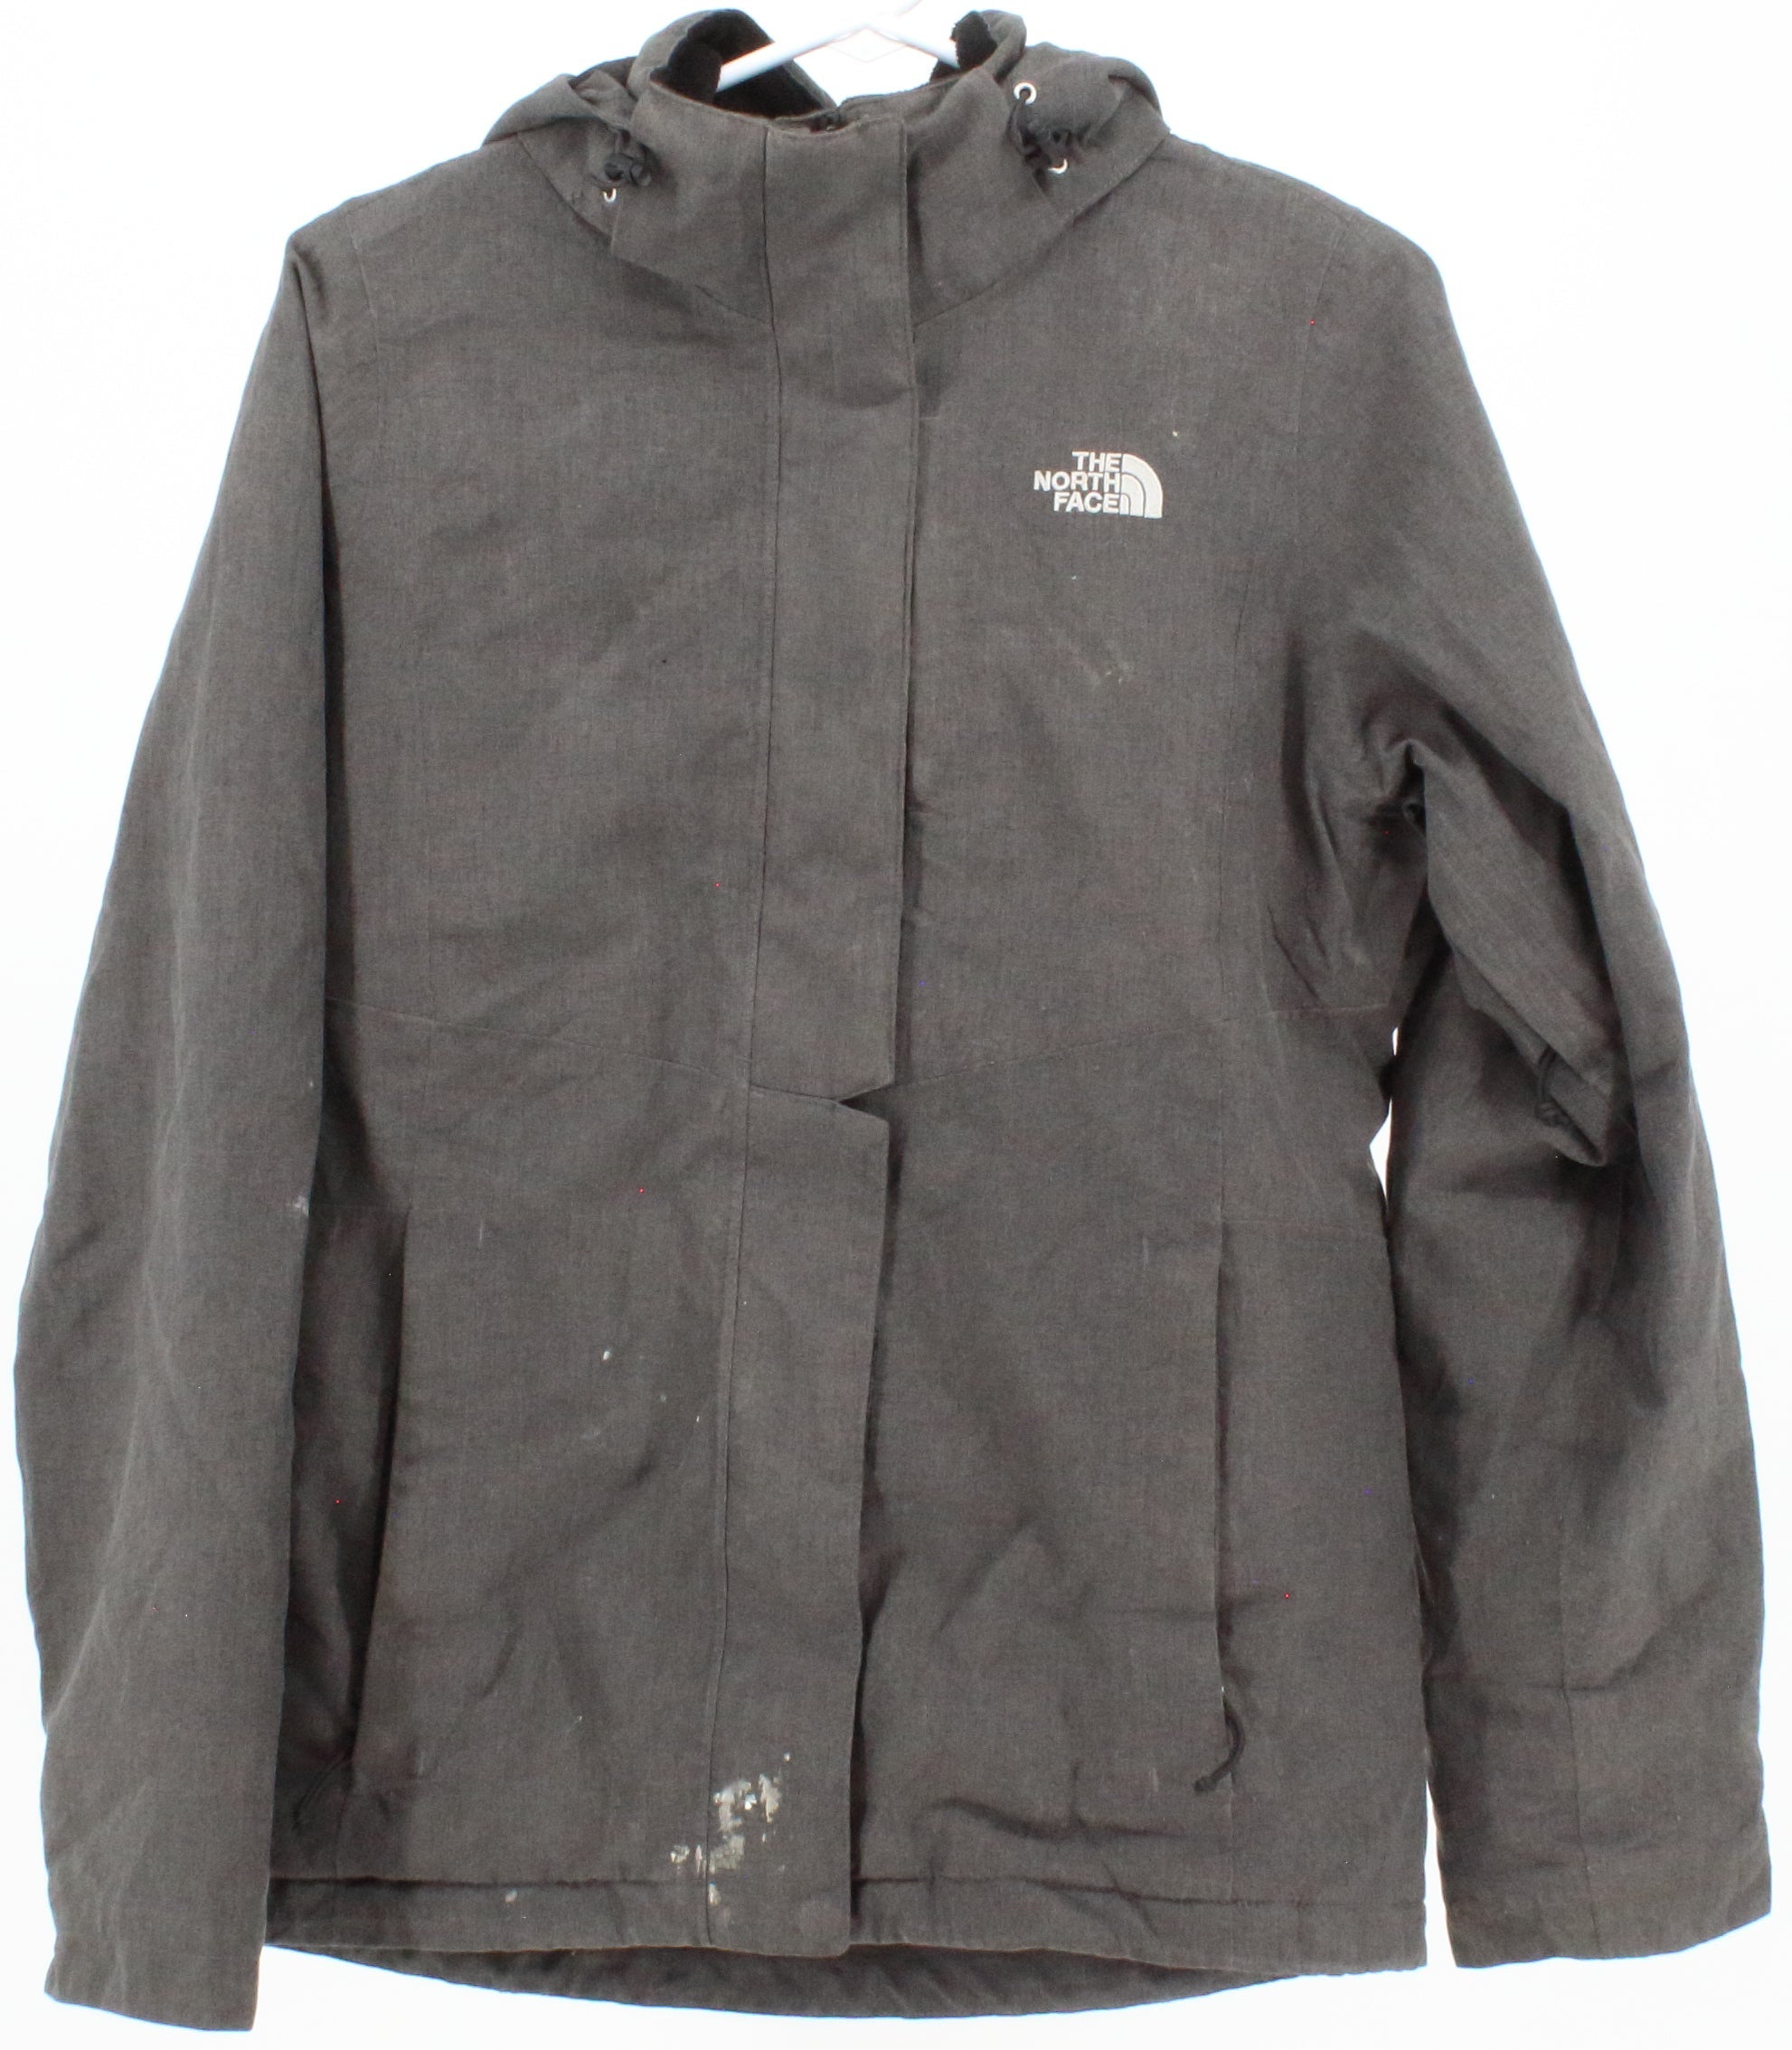 THE NORTH FACE mens HyVent ski pants, great price $30.00